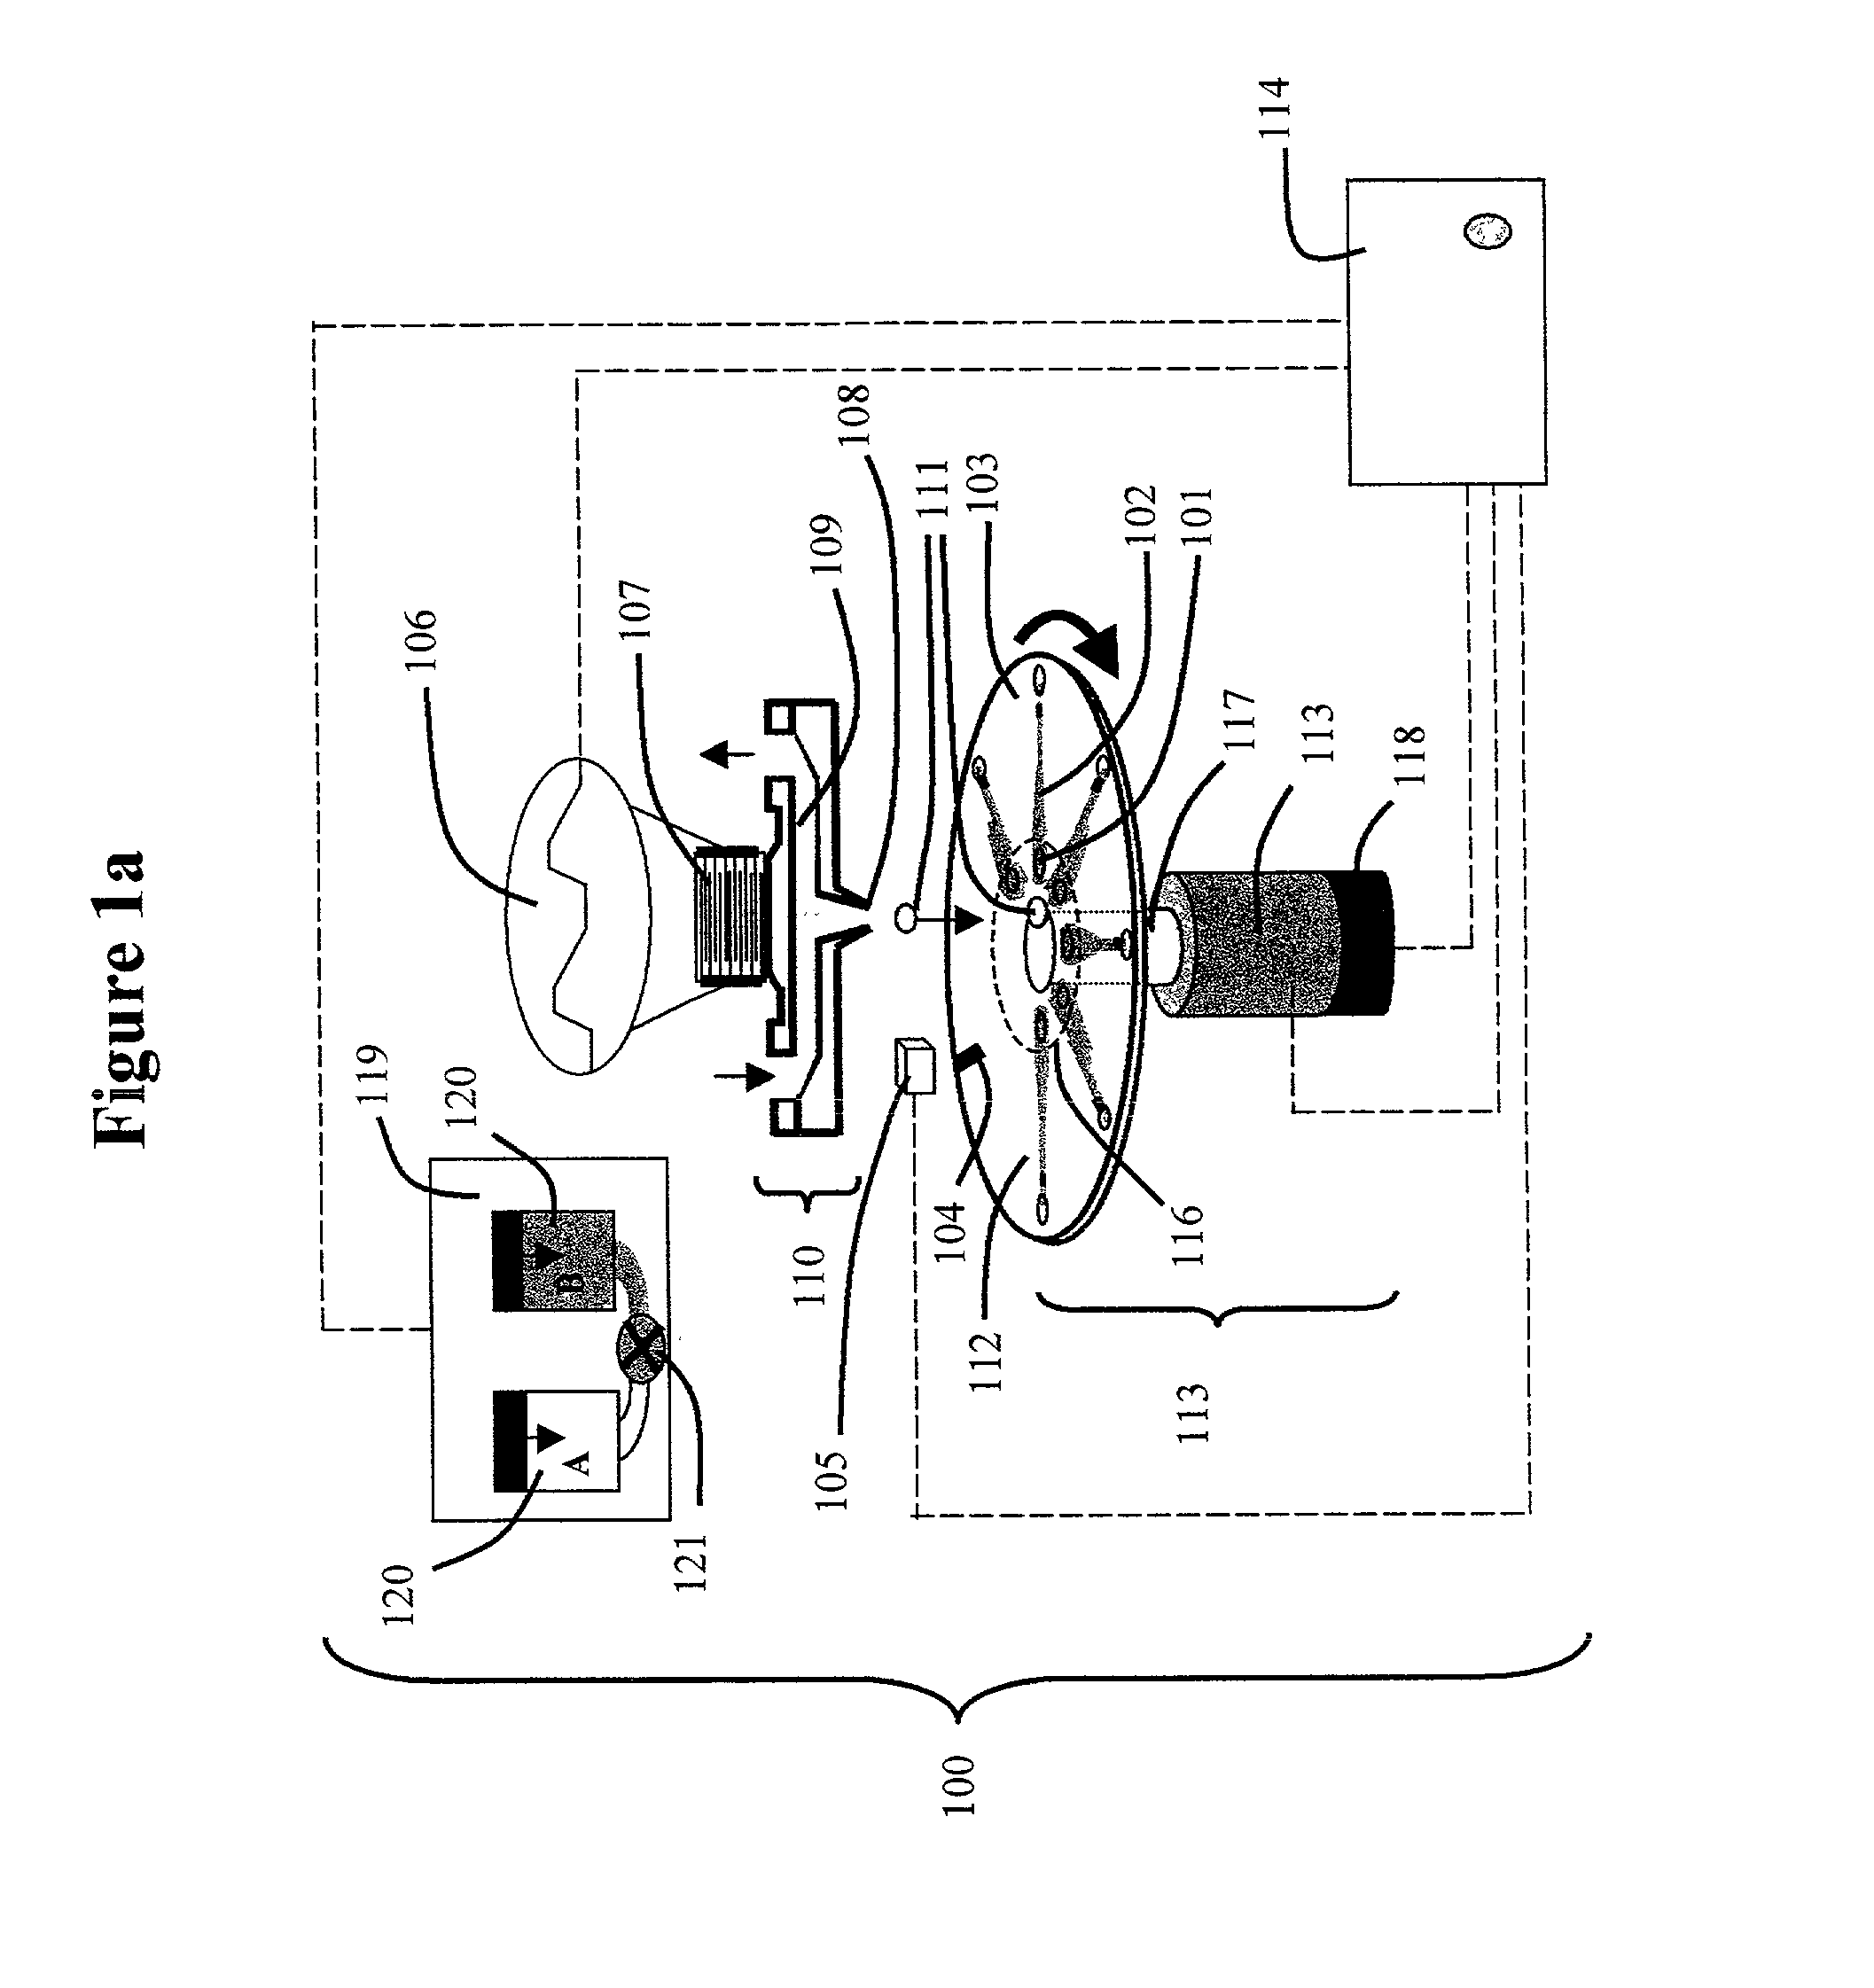 Method and instrumentation for micro dispensation of droplets